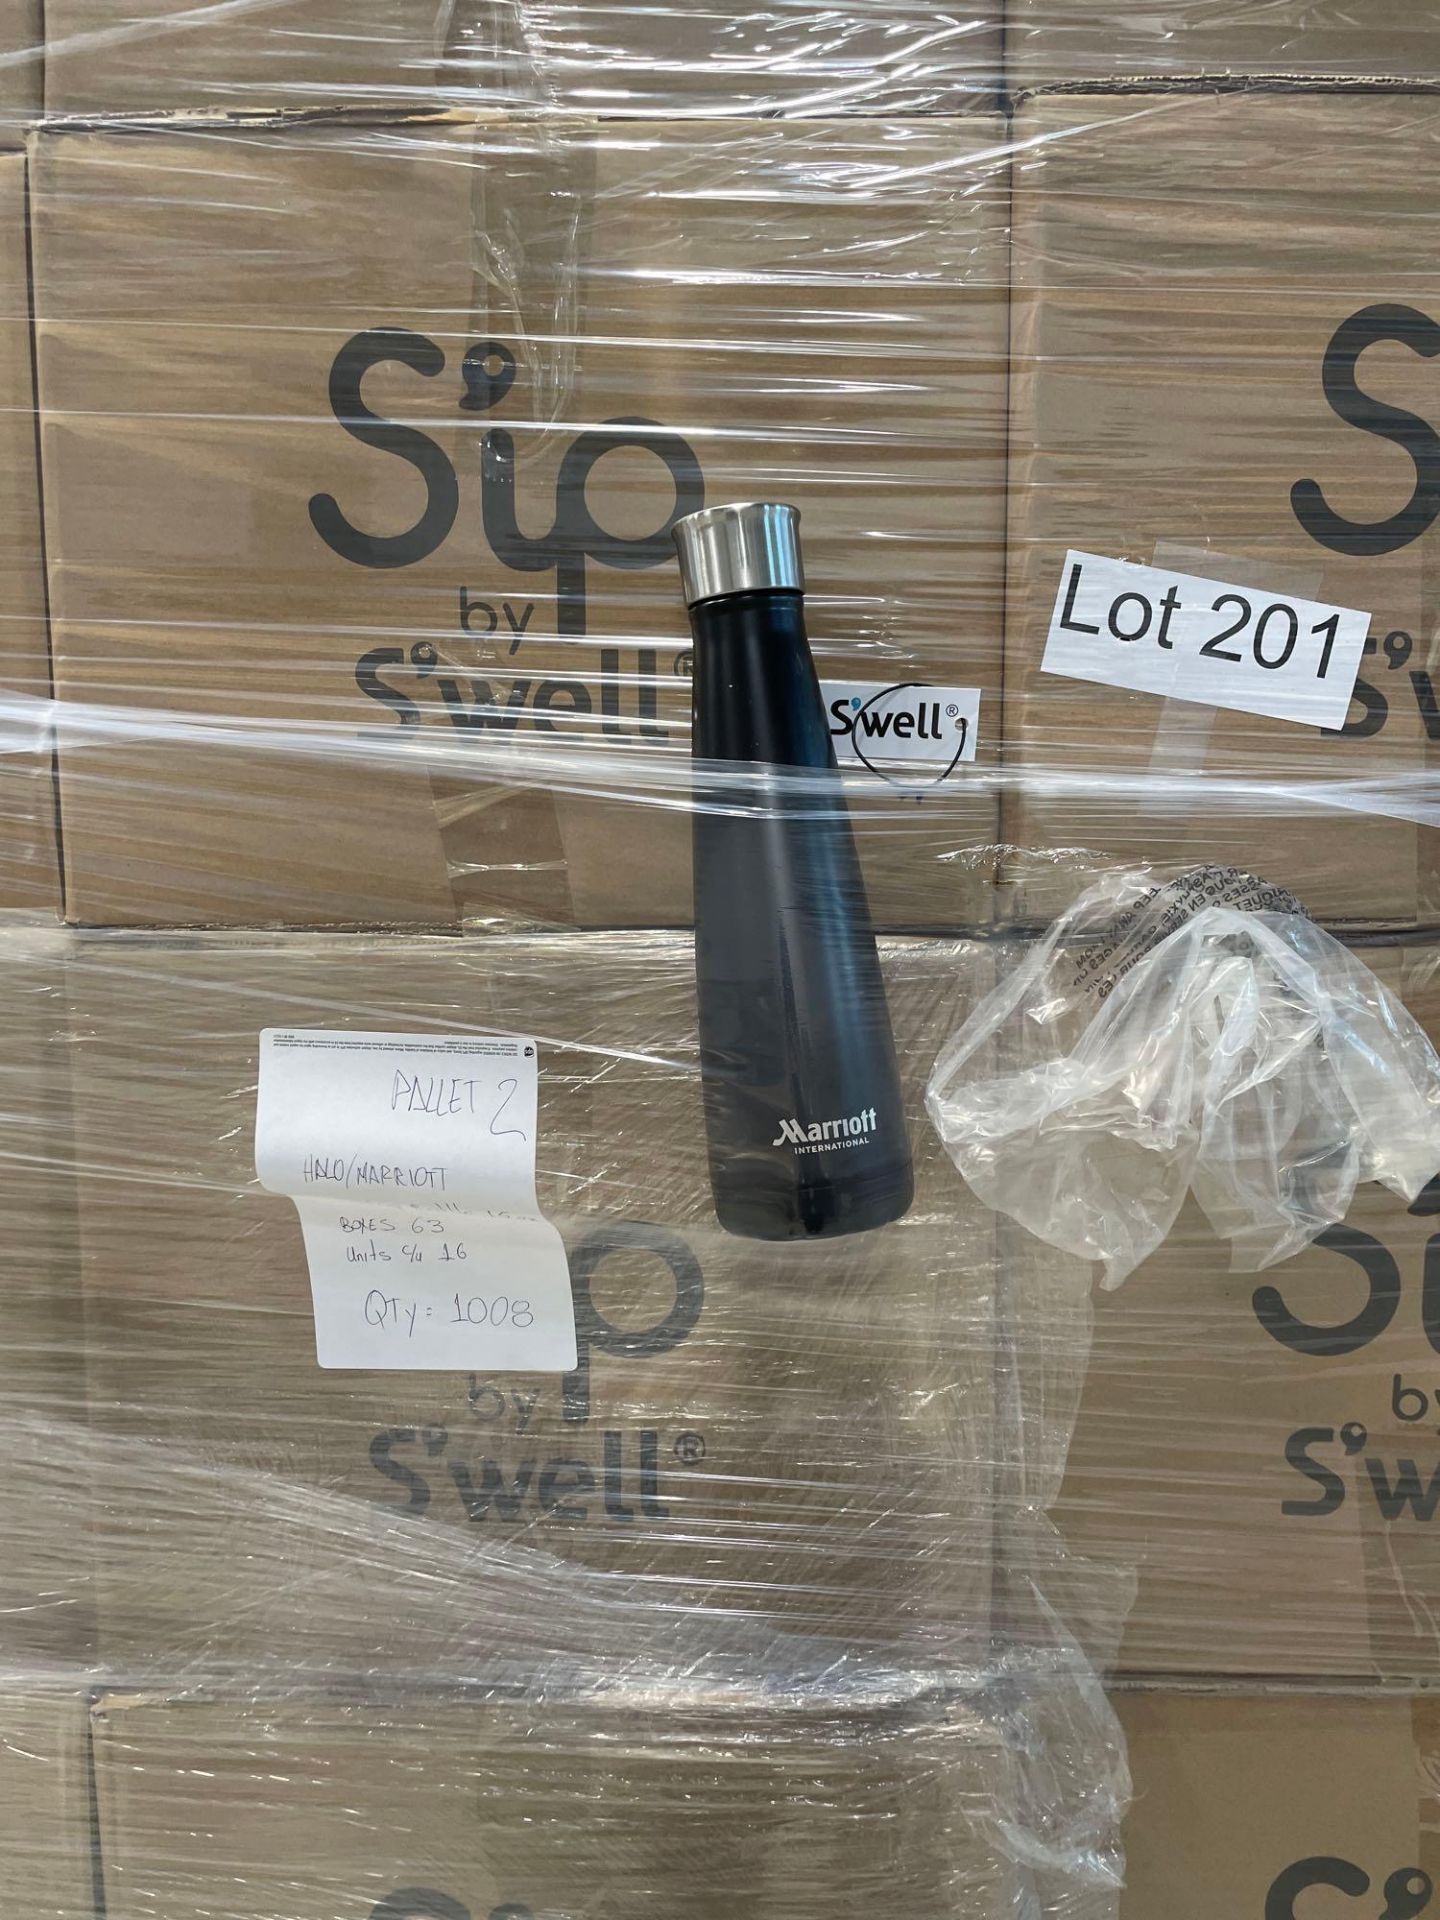 Pallet- Sip by Swell bottles with Marriott logo, approx 1000 units